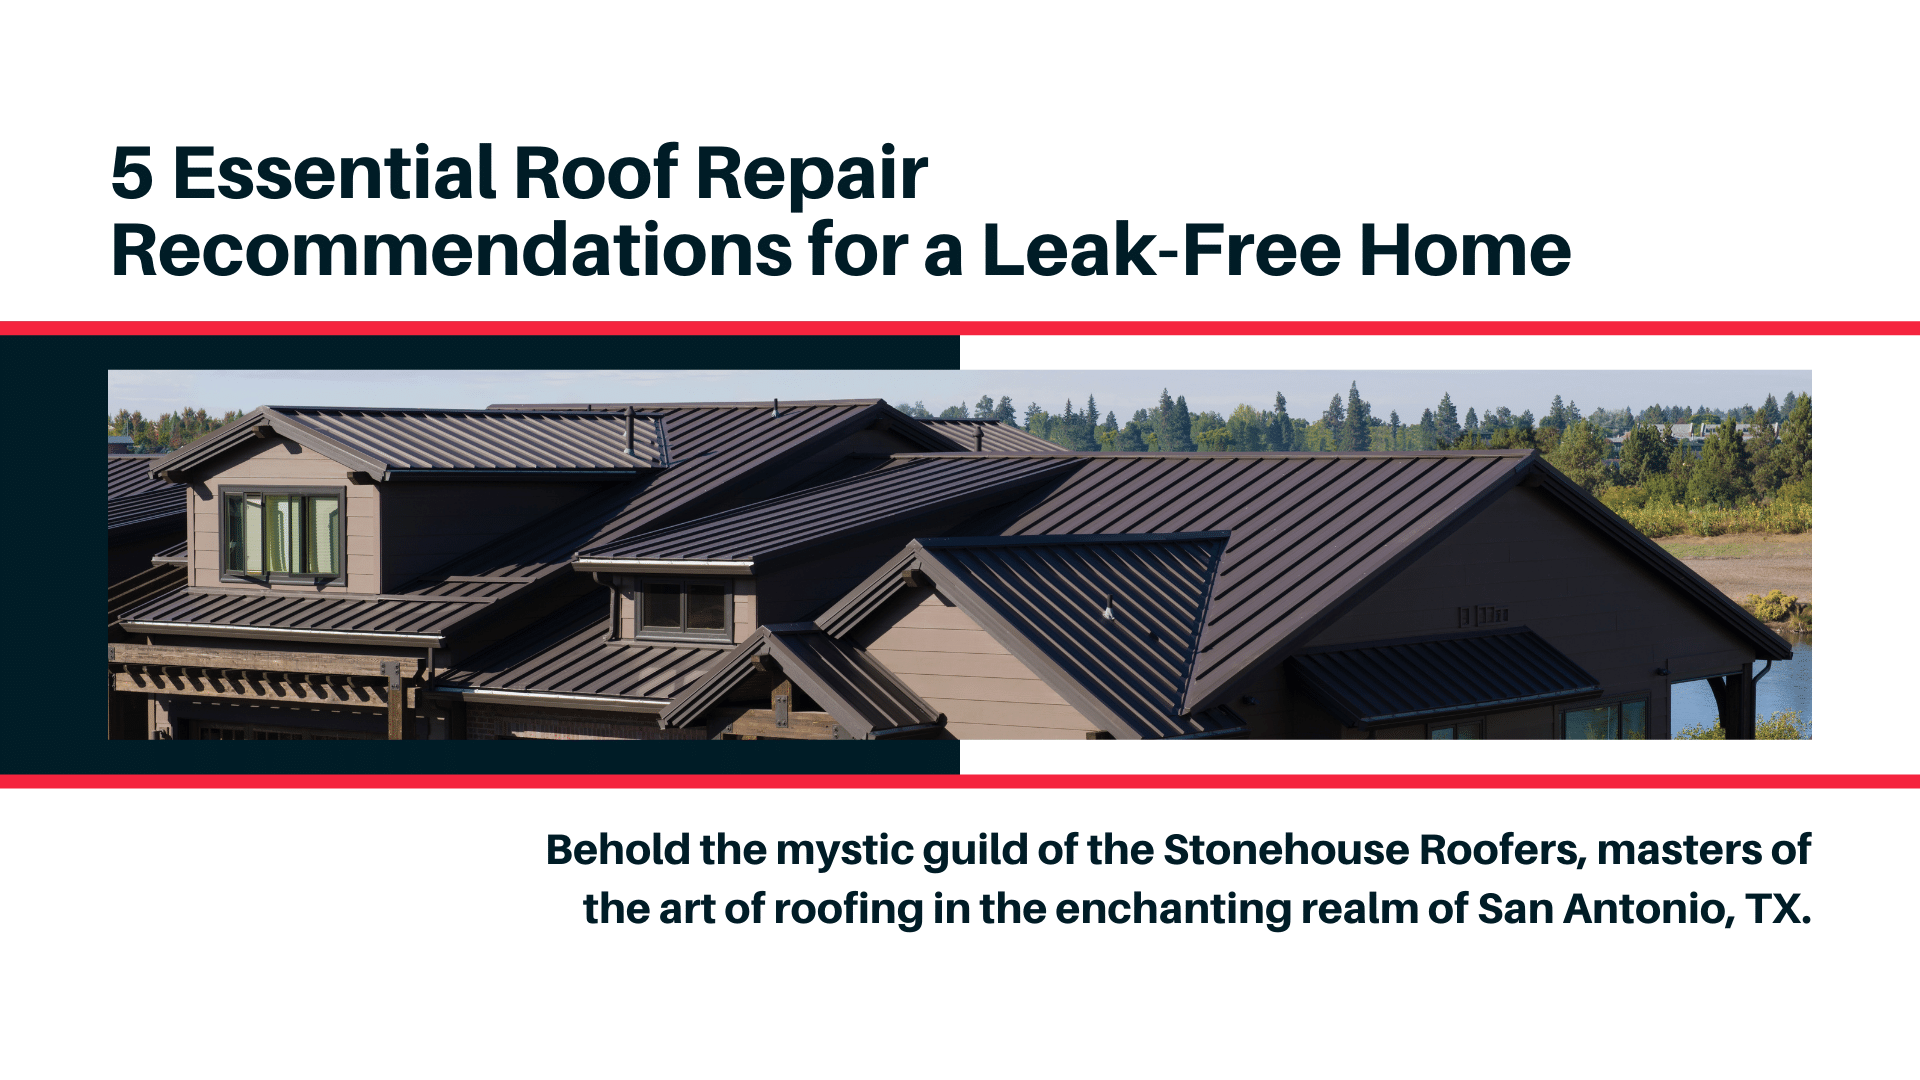 5 Essential Roof Repair Recommendations for a Leak-Free Home